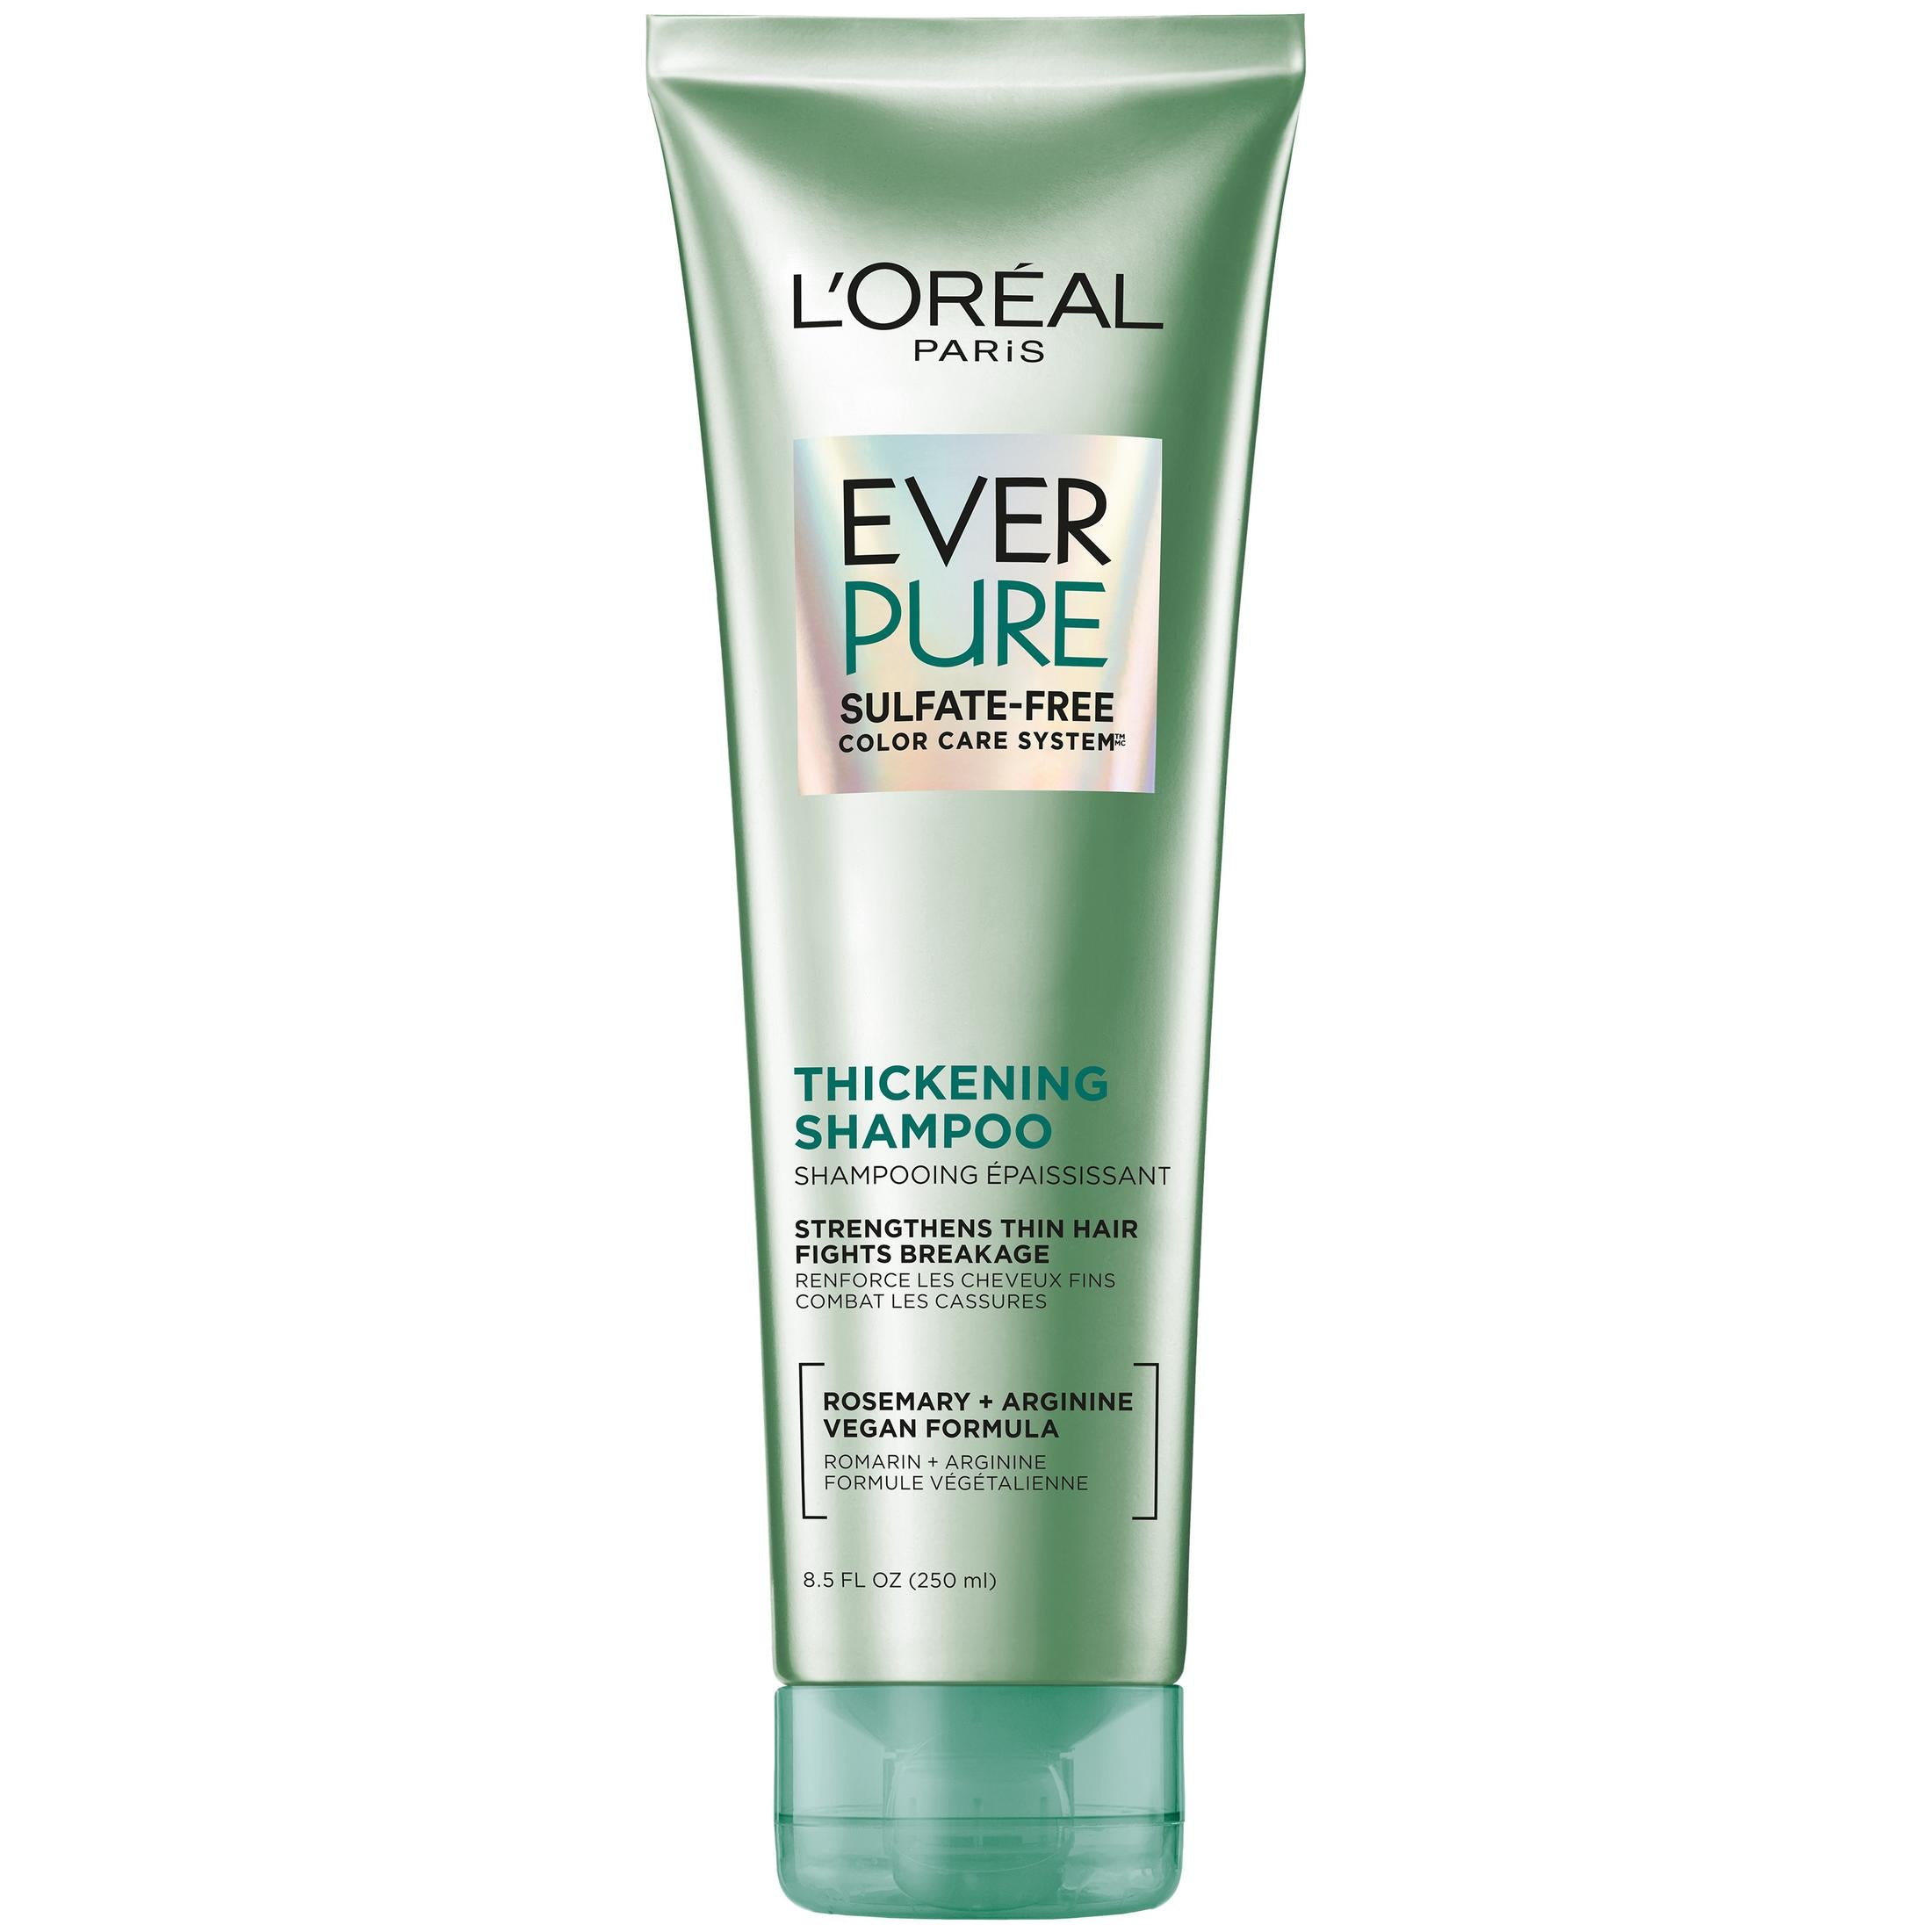 L'Oreal Paris EverStrong Thickening Sulfate Free Shampoo for Thin hair, 8.5 fl oz | MTTS384